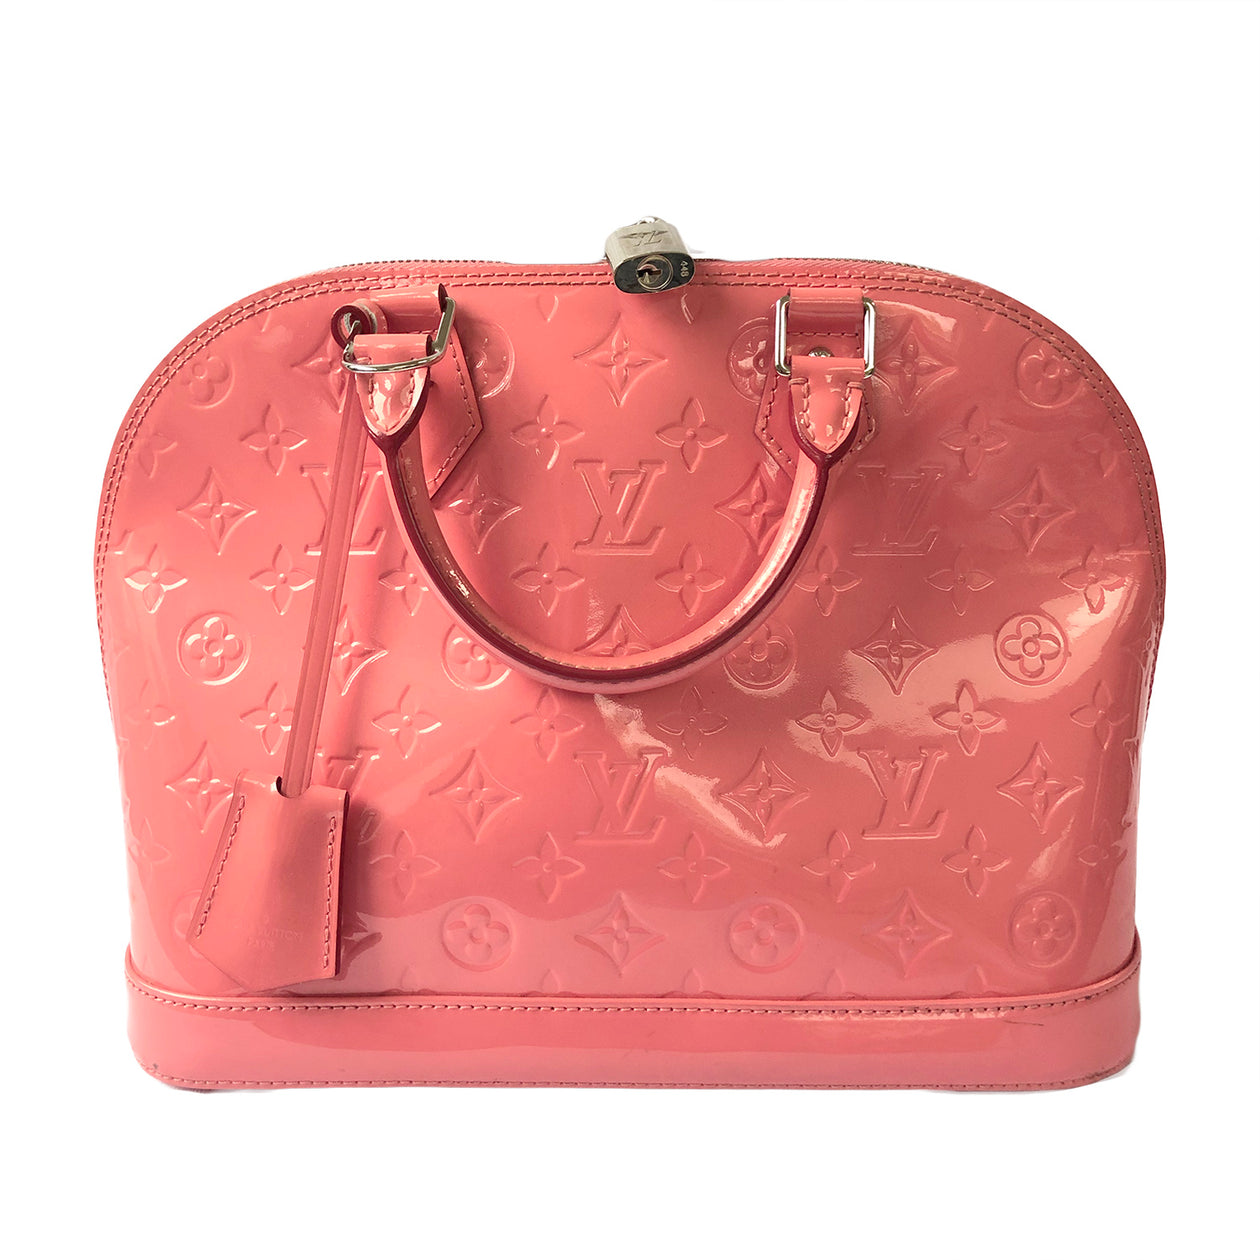 Louis Vuitton Pink Bags & Handbags for Women, Authenticity Guaranteed